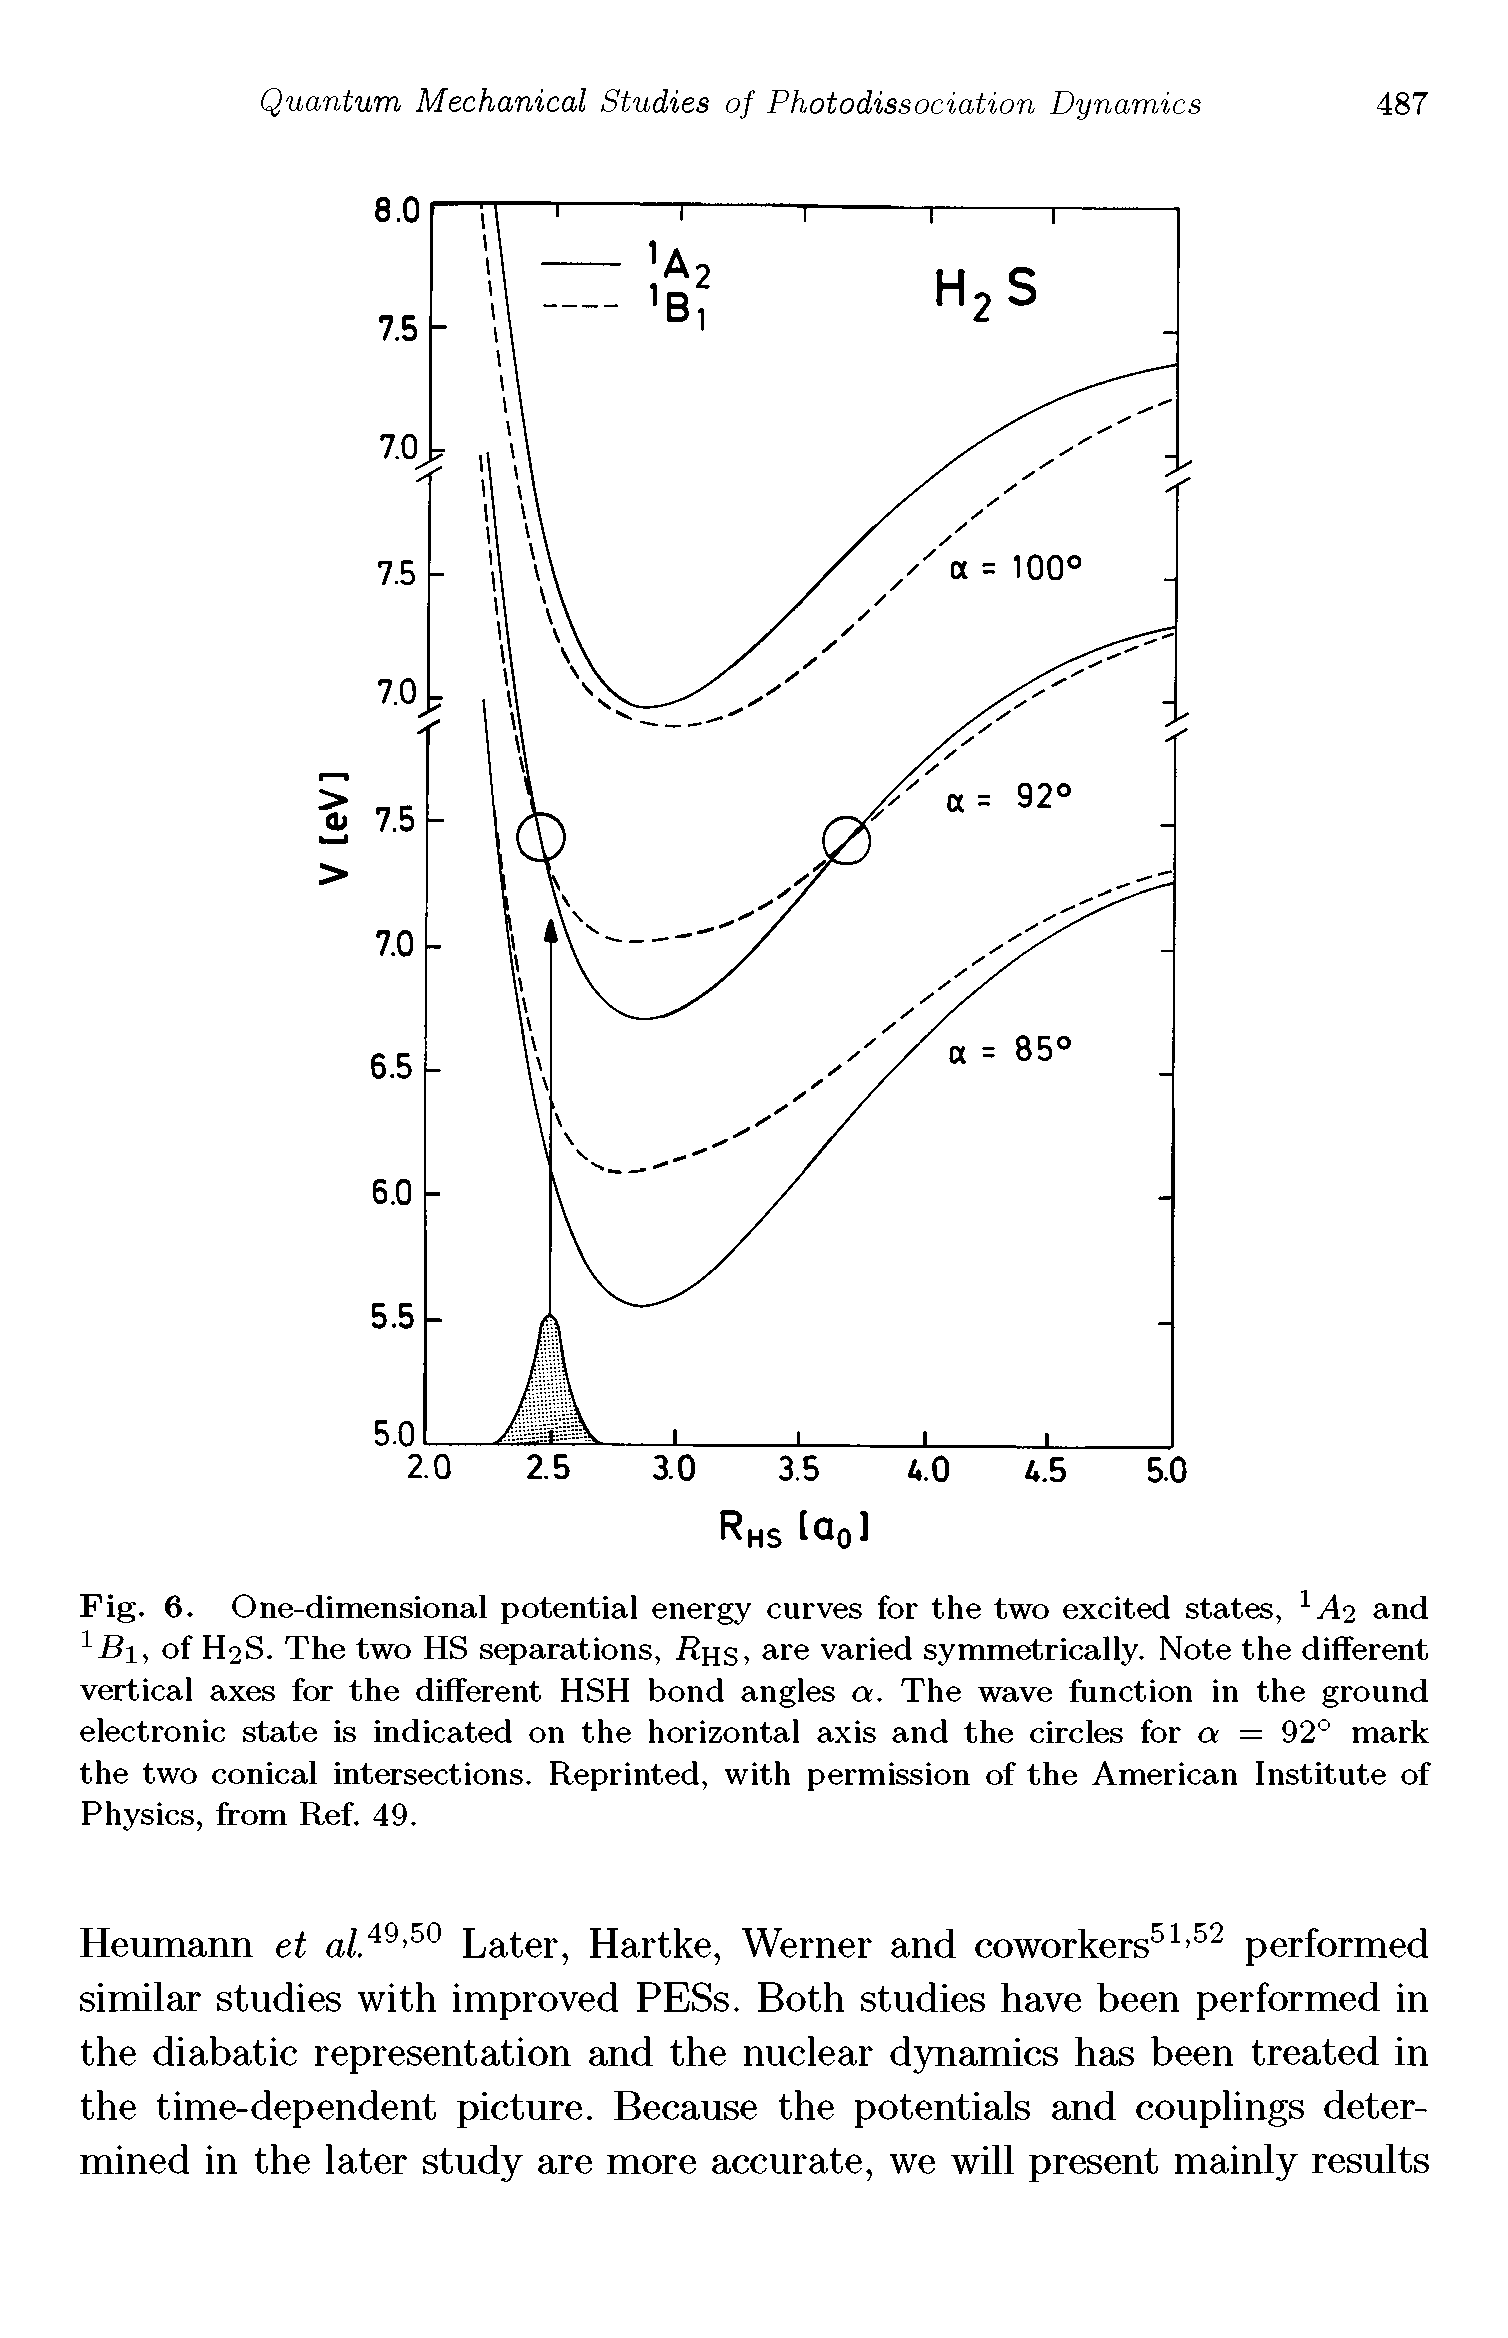 Fig. 6. One-dimensional potential energy curves for the two excited states, A2 and of H2S. The two HS separations, Hhs. varied symmetrically. Note the different vertical axes for the different HSH bond angles a. The wave function in the ground electronic state is indicated on the horizontal axis and the circles for a = 92° mark the two conical intersections. Reprinted, with permission of the American Institute of Physics, from Ref. 49.